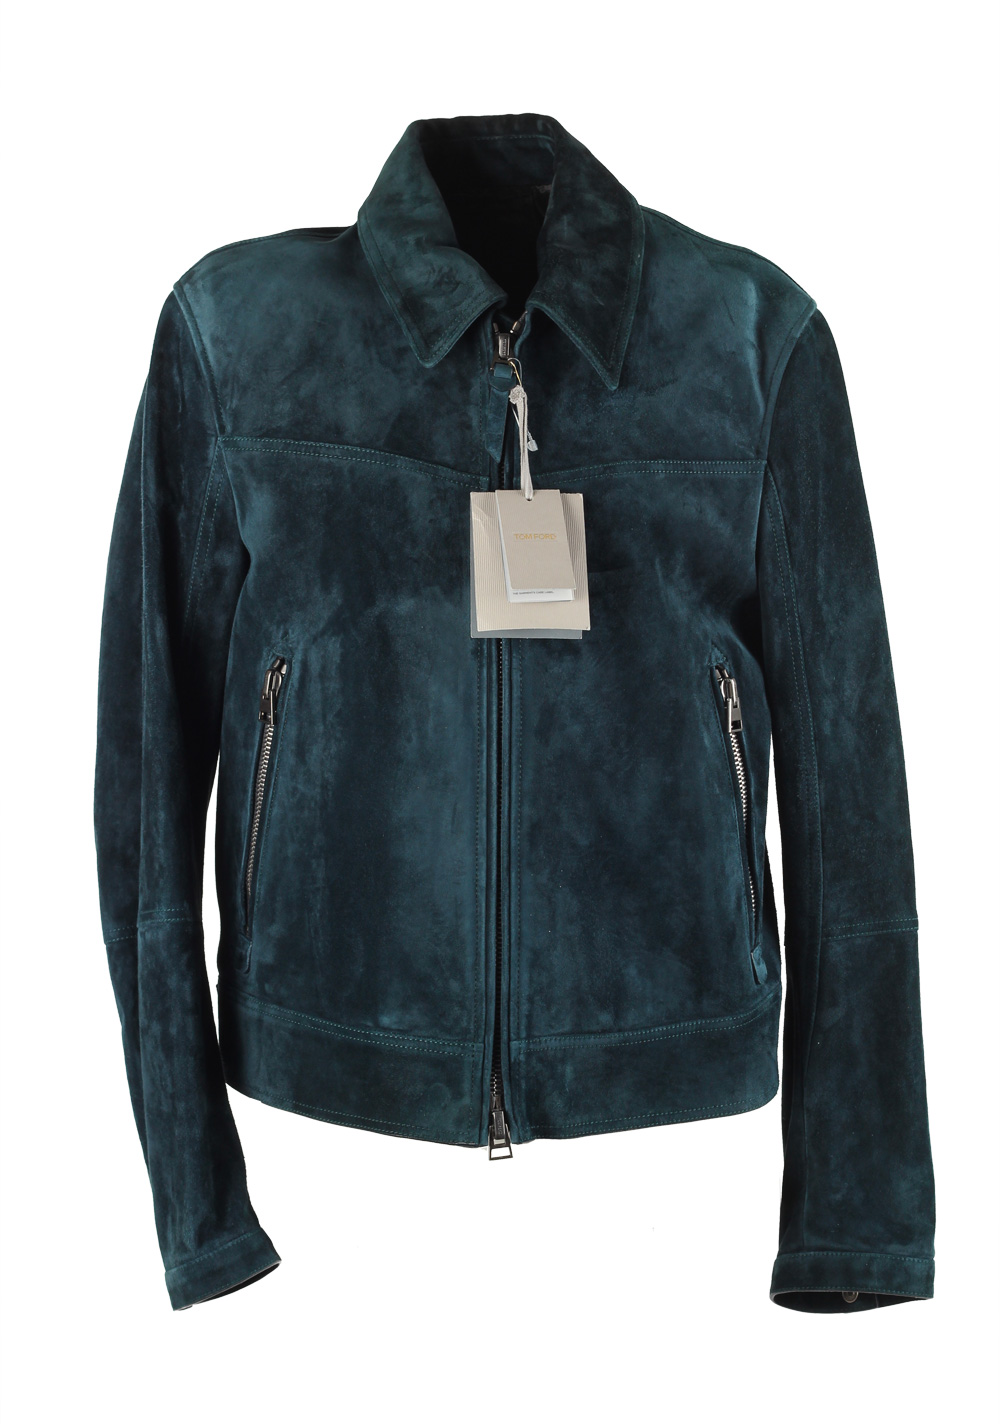 TOM FORD Teal Leather Suede Jacket Coat Size 50 / 40R U.S. Costume Limité